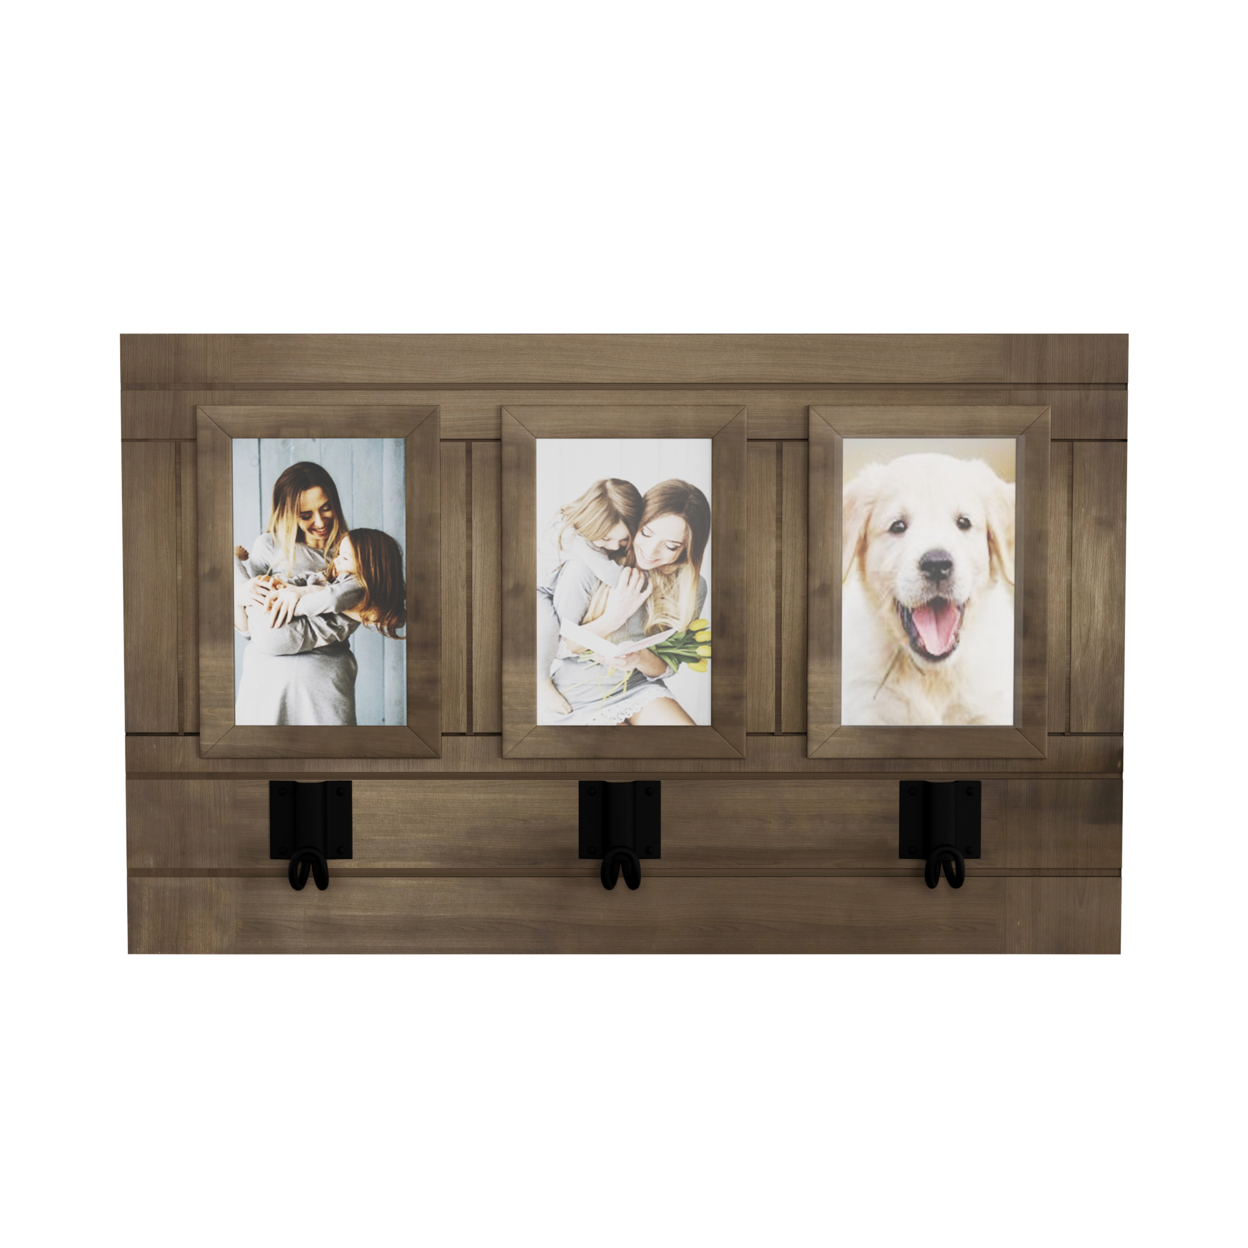 Wall Picture Collage With 3 Hanging Hooks- Wall Mounted Photo Frame Decor With Rustic Wood Look, Holds 4x6 Pictures